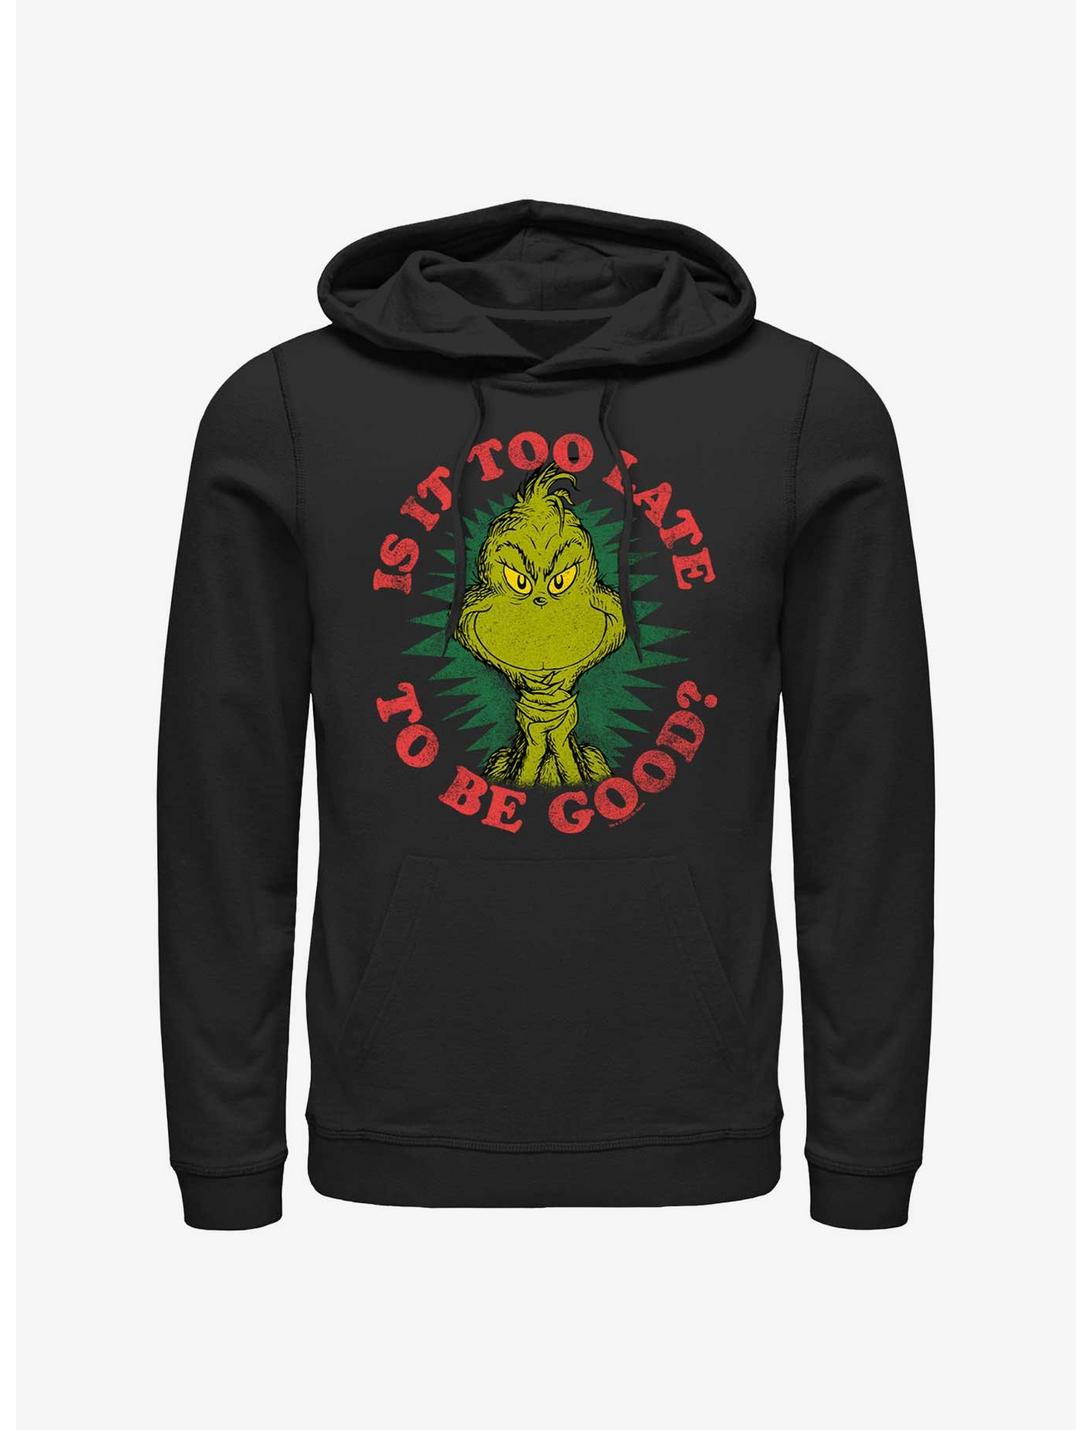 Dr. Seuss Grinch Is It Too Late To Be Good Hoodie, BLACK, hi-res